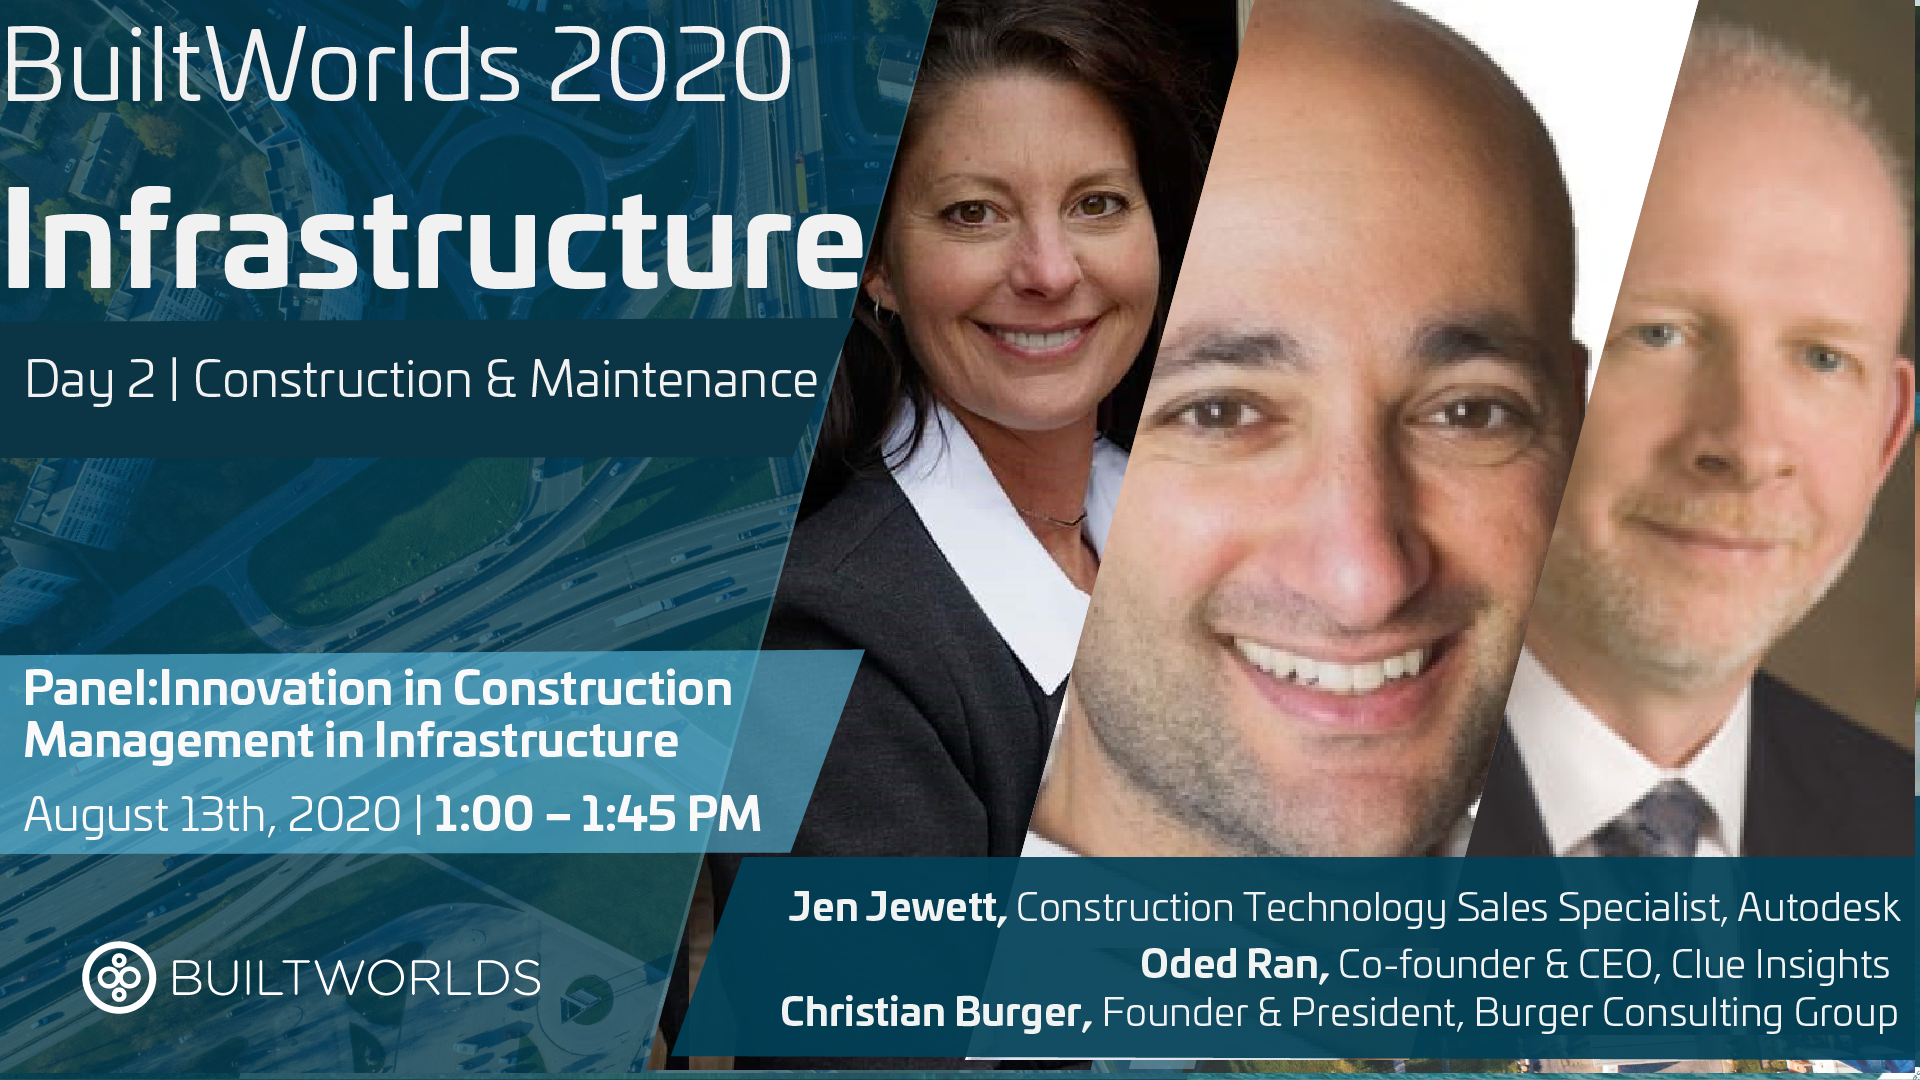 Clue Insights, Christian Burger, Autodesk at Infrastructure